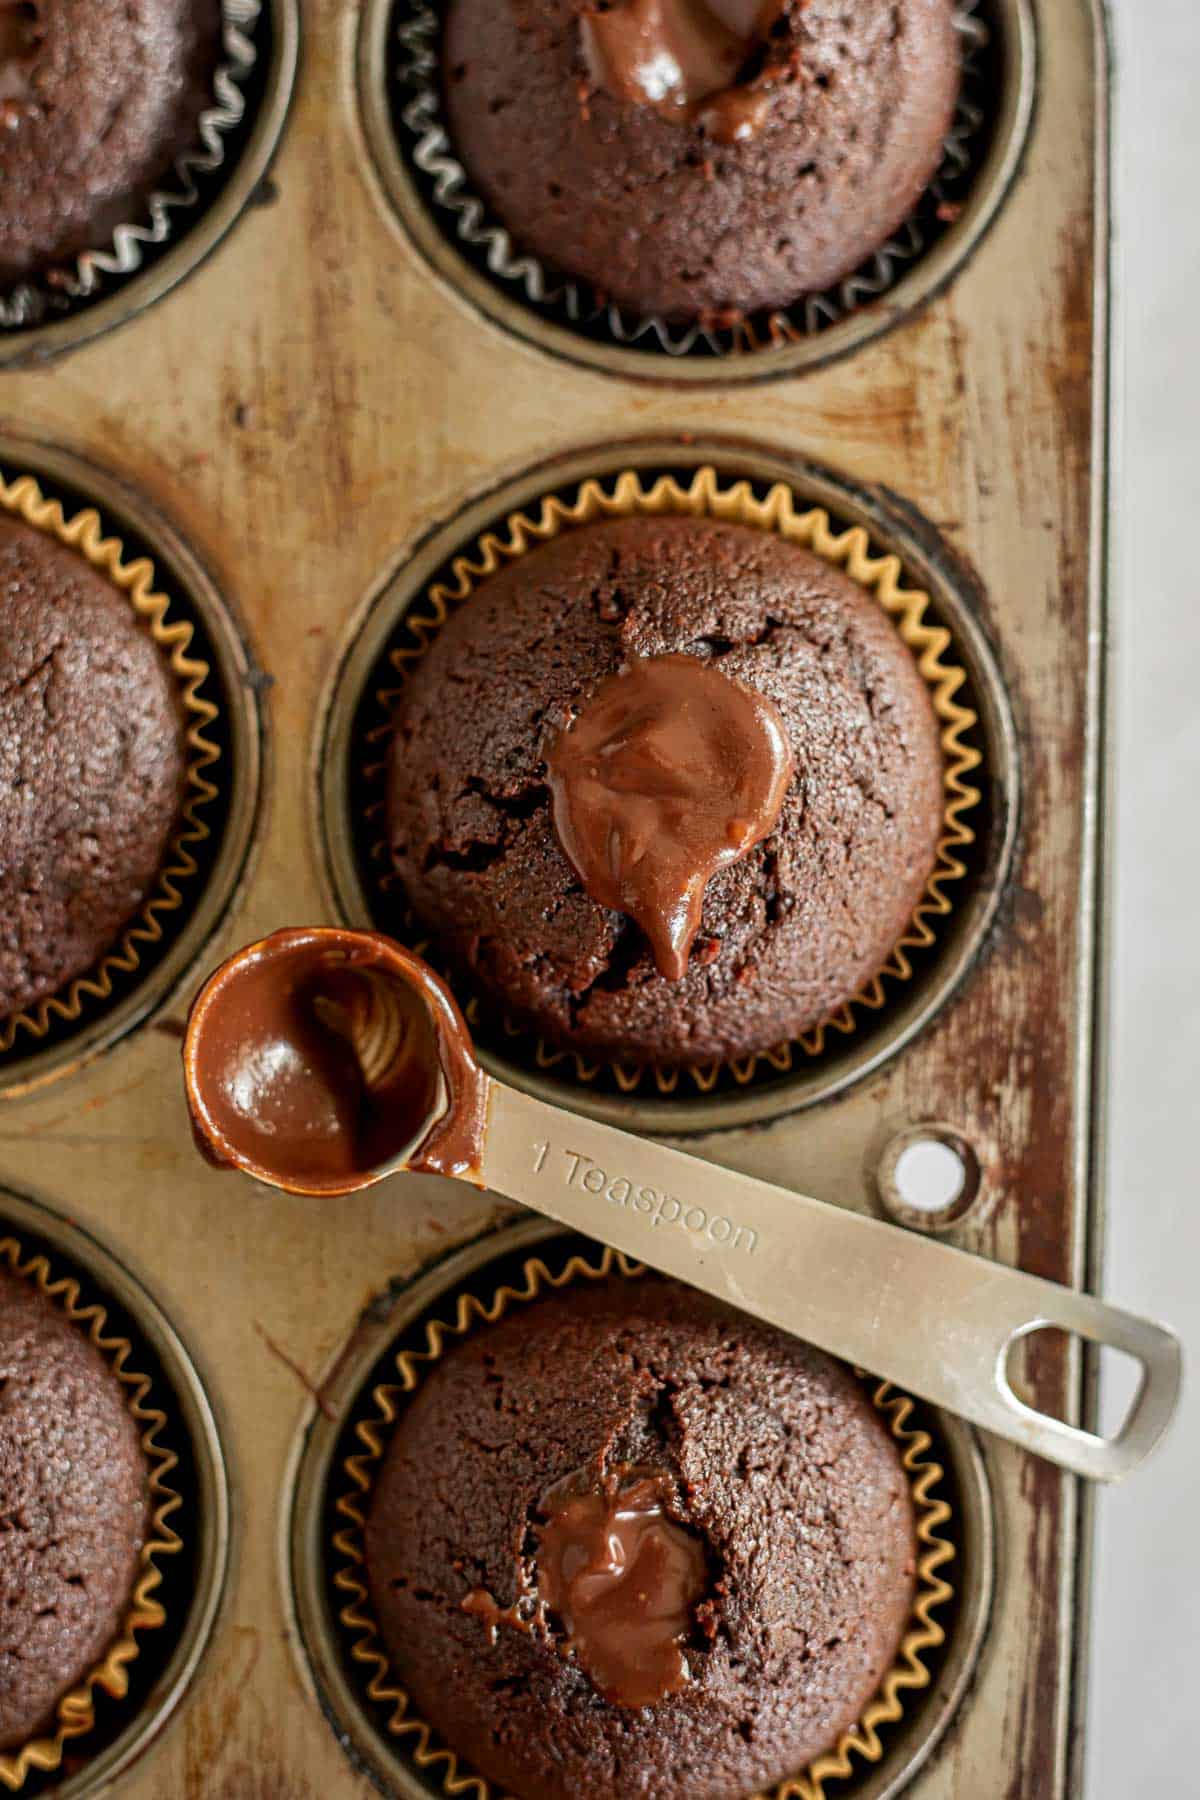 a baked chocolate fudge cupcake filled with chocolate ganache.